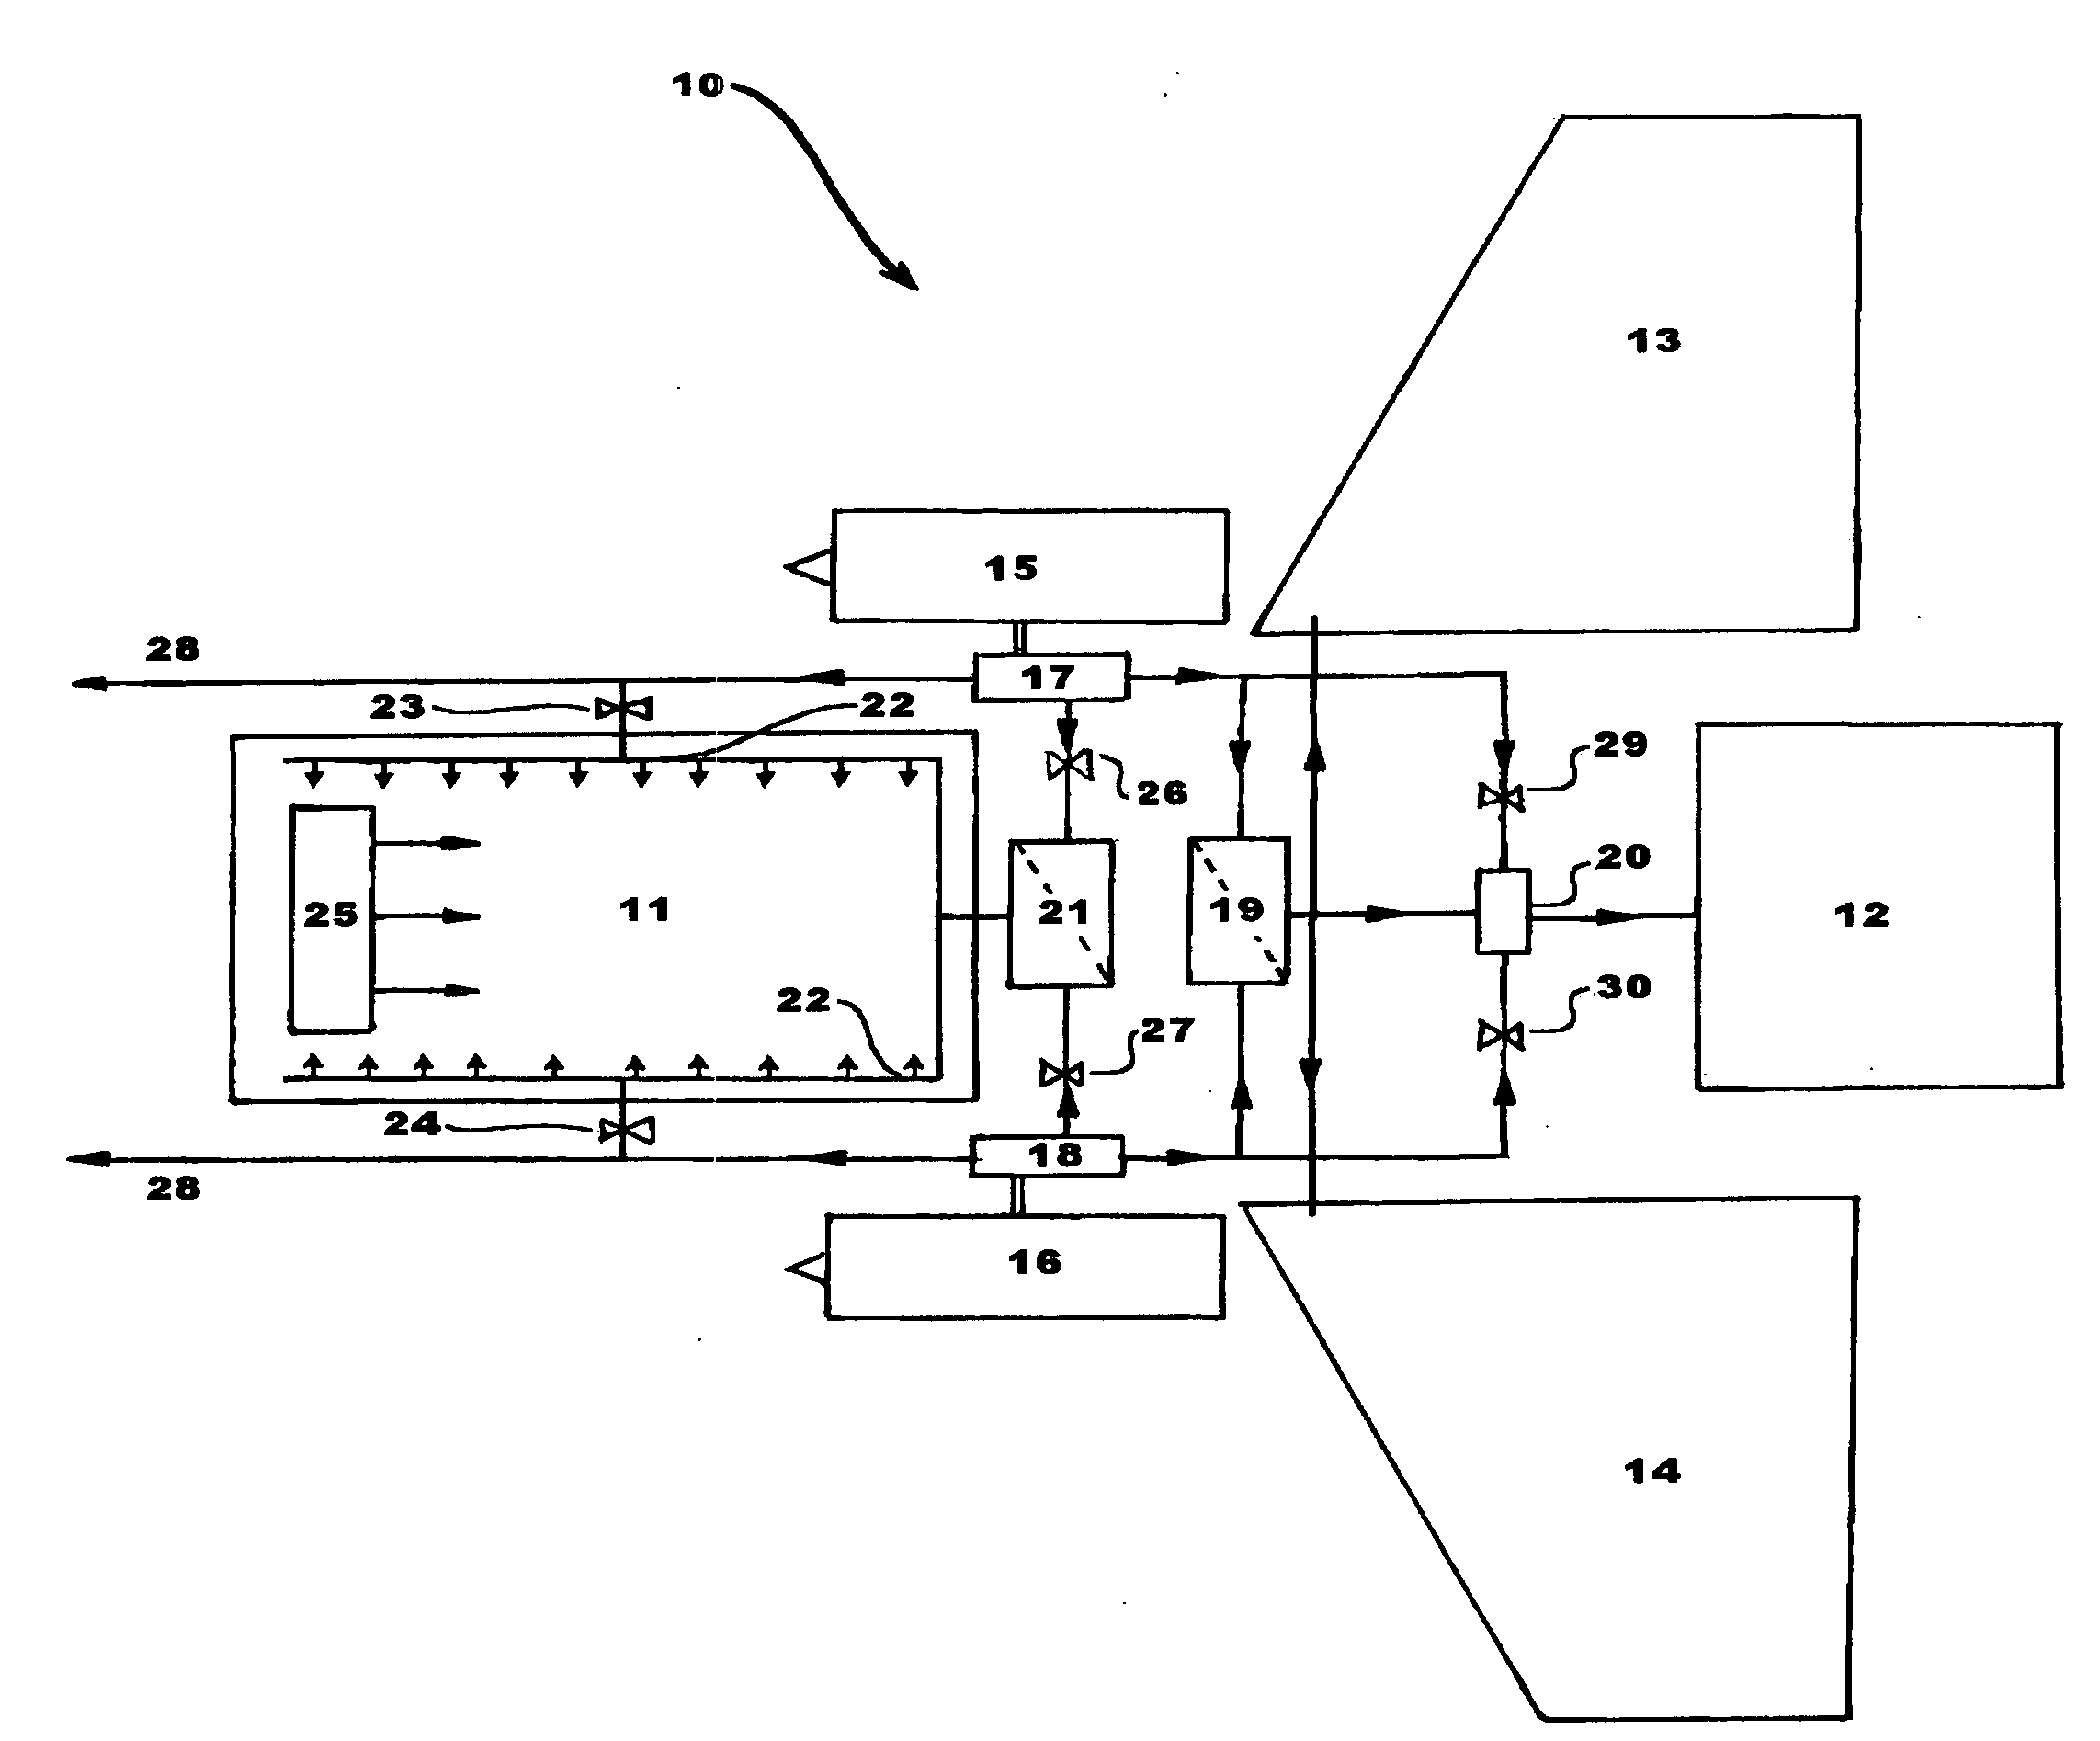 Hypoxic aircraft fire prevention and suppression system with automatic emergency oxygen delivery system